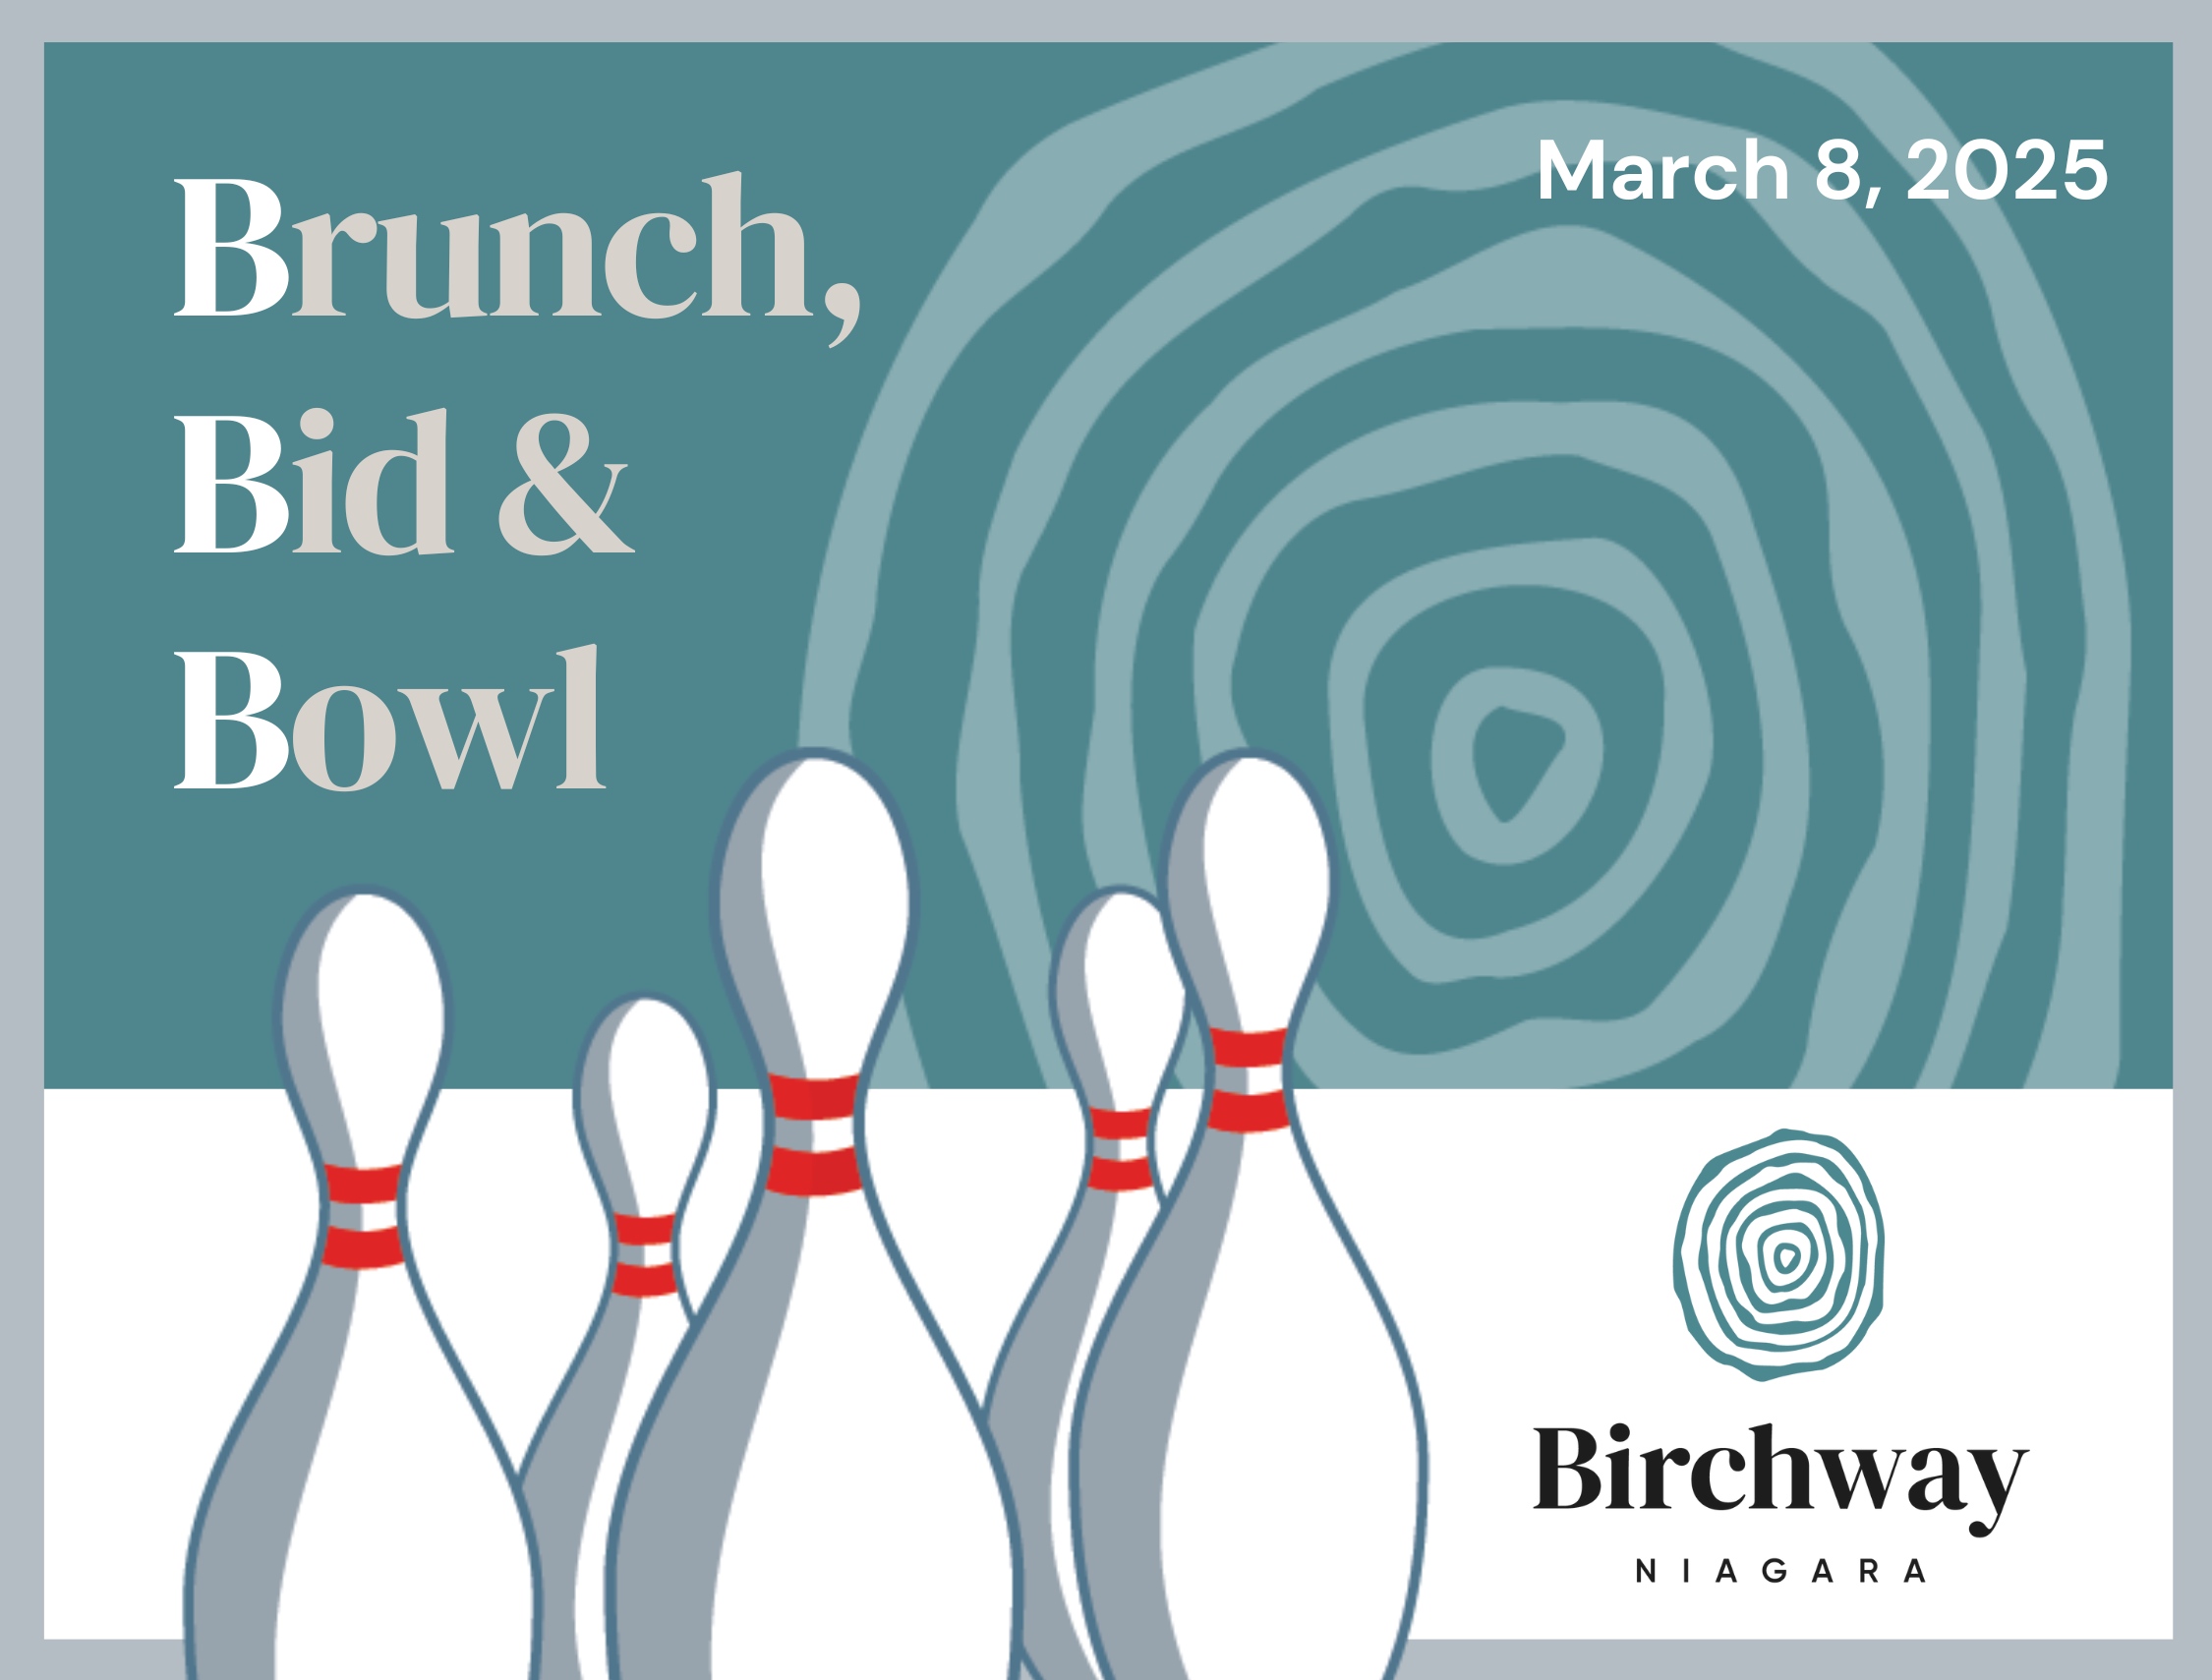 Title: Brunch, Bid & Bowl - March 8, 2025. Image: Bowling pins on a teal background with rings that look like tree rings.